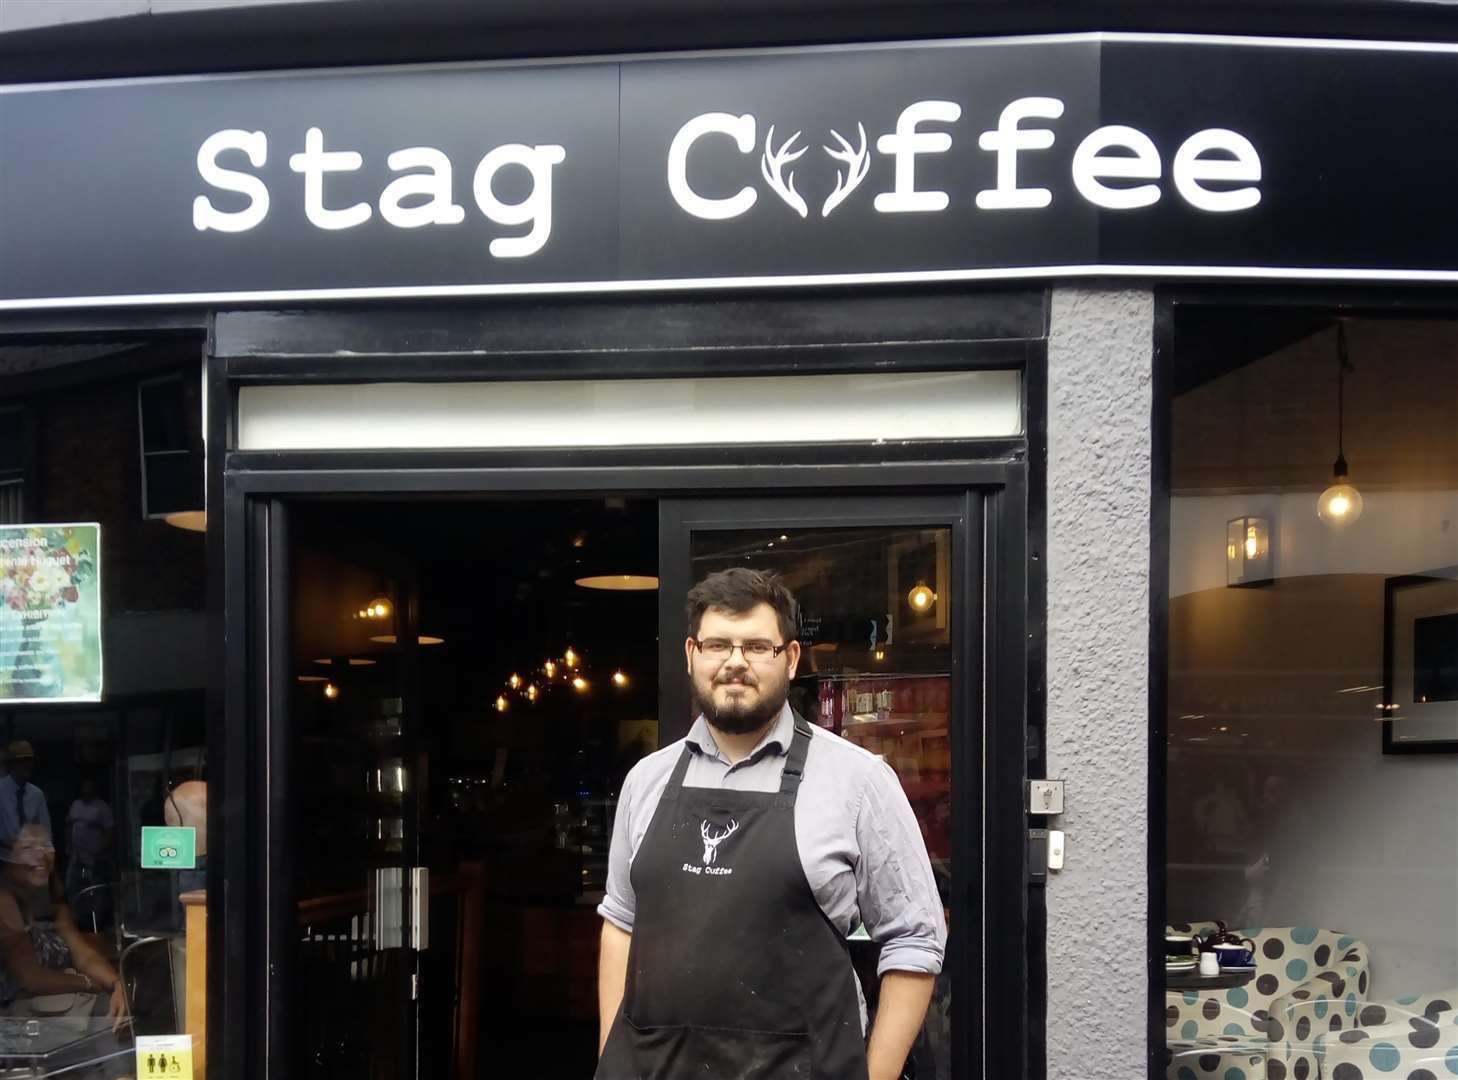 Freddie Hewett at his Stag coffee shop - now offering home grocery deliveries